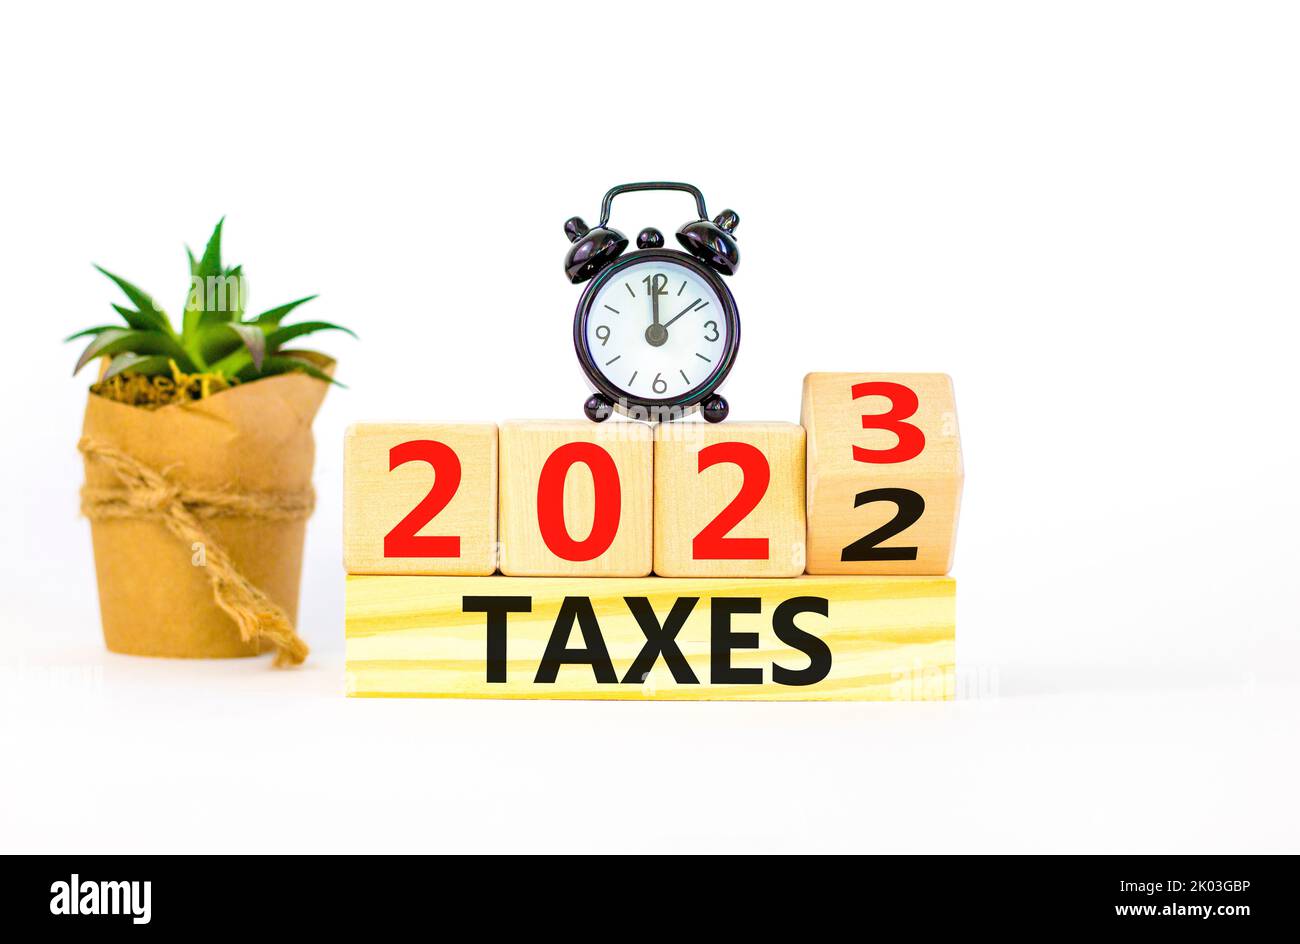 2023 Taxes New Year Symbol Turned Wooden Cube And Changes Words Taxes 2022 To Taxes 2023 Black Alarm Clock Beautiful White Table White Background 2K03GBP 